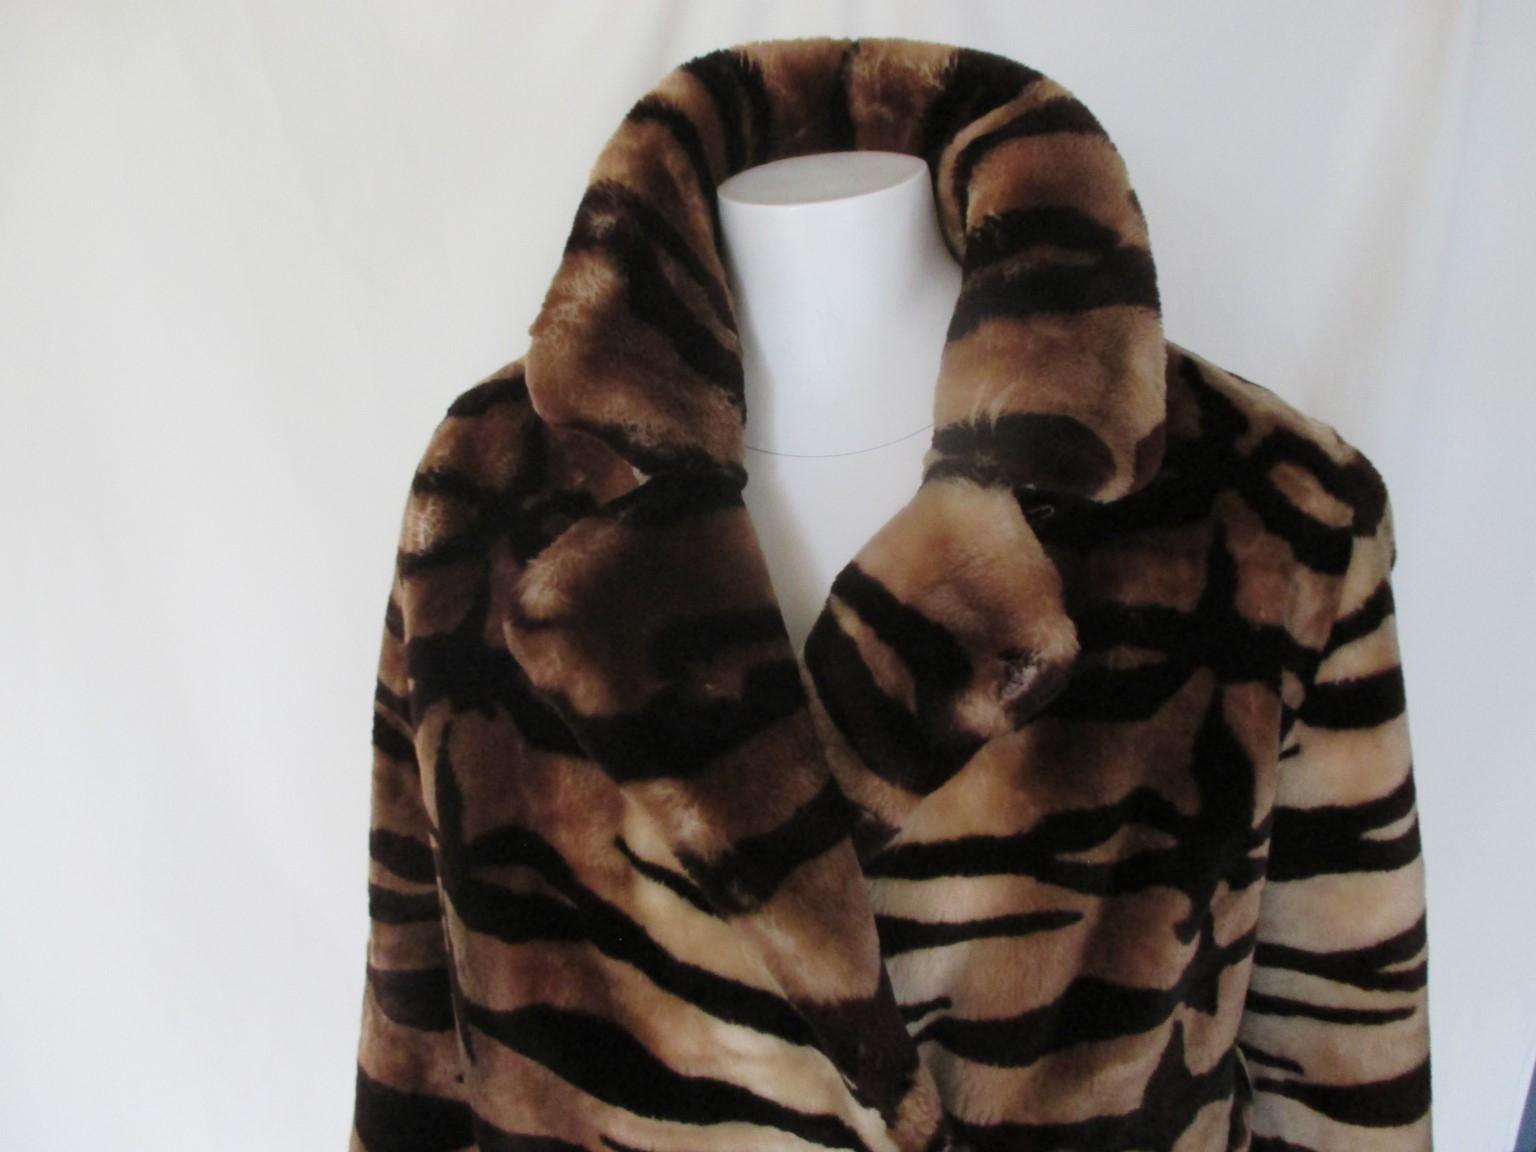 This Unique vintage coat from 1980's is made of sheared sheepskin/mouton/beaver fur in design tiger print.

We offer more luxury fur items, view our frontstore.

Details:
With 2 side pockets, 2 closing clips and 4 belt loops, no belt included.
Fully